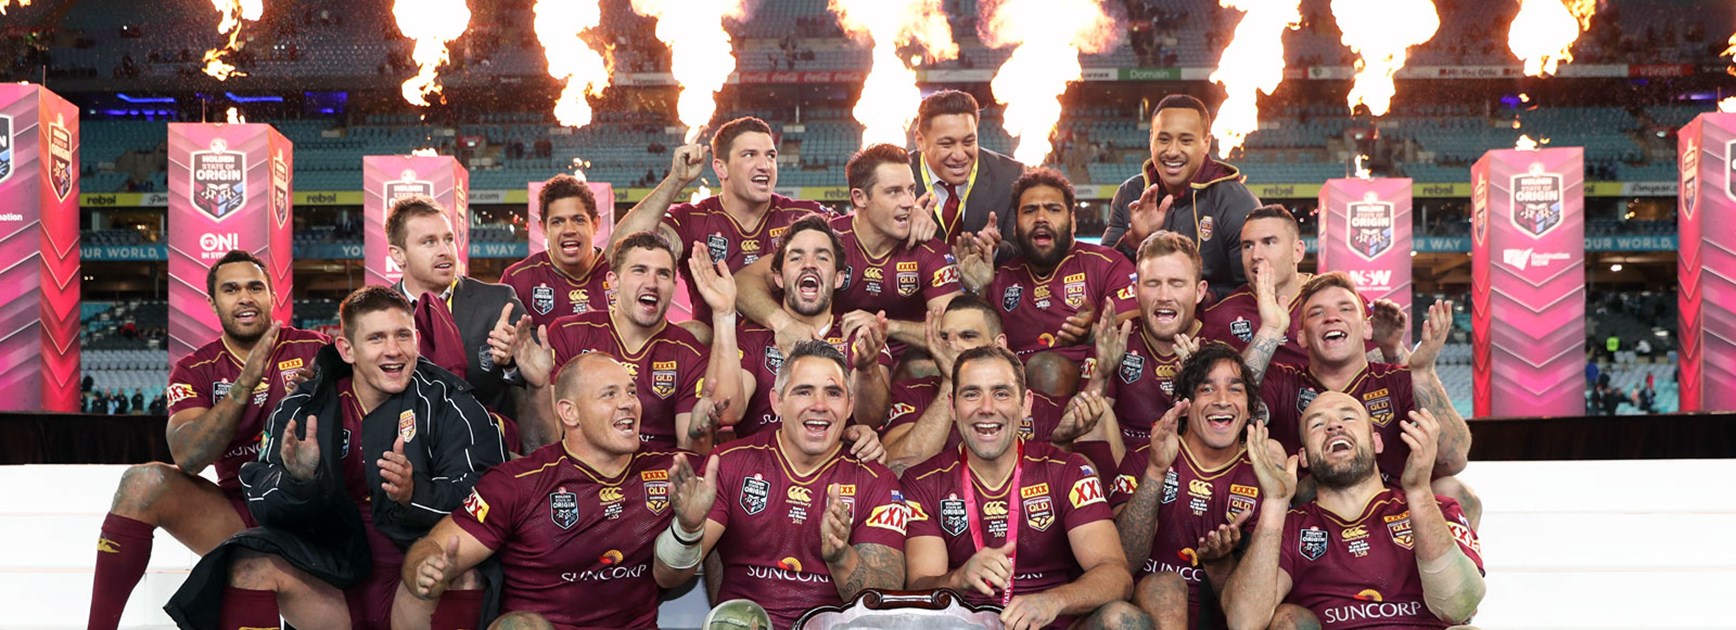 Perth will host a State of Origin fixture for the first time in 2019.